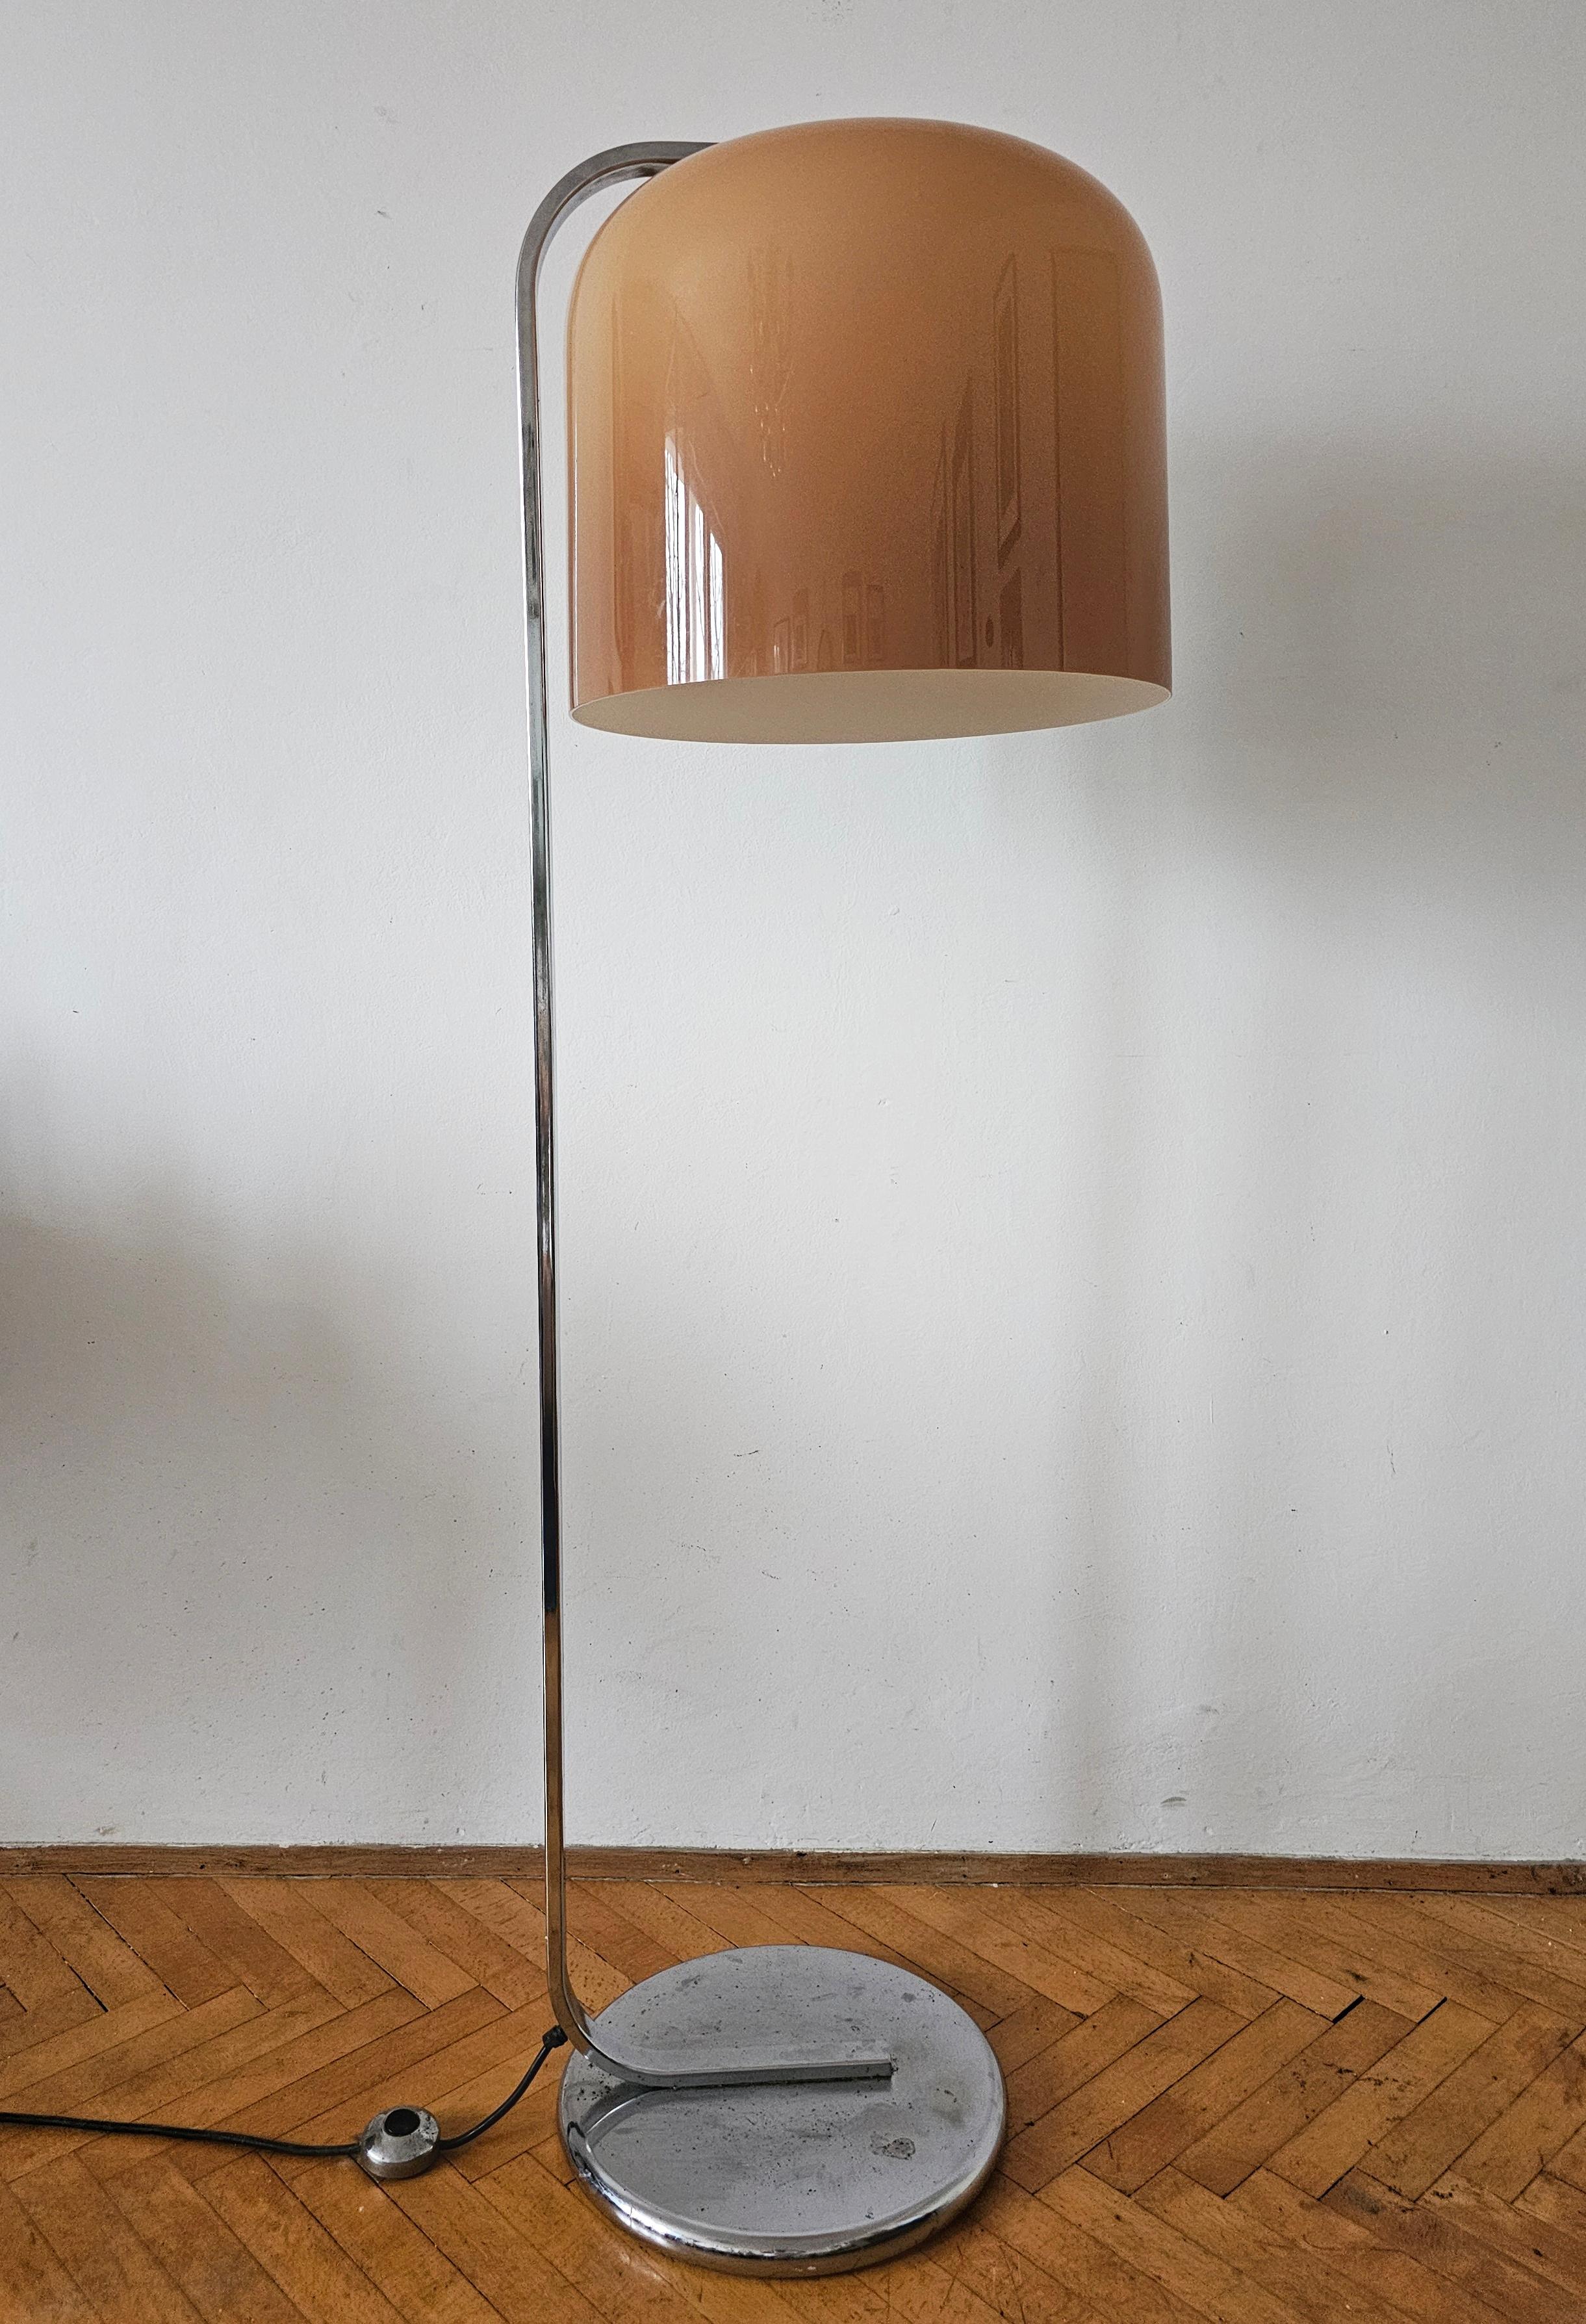 In this listing you will find an exceptionally rare floor lamp from Alvise series, designed by Luigi Massoni for Harvey Guzzini. It features a chrome plated steel stand and a large acrylic shade in colour of cappuccino. The lamp was manufactured by